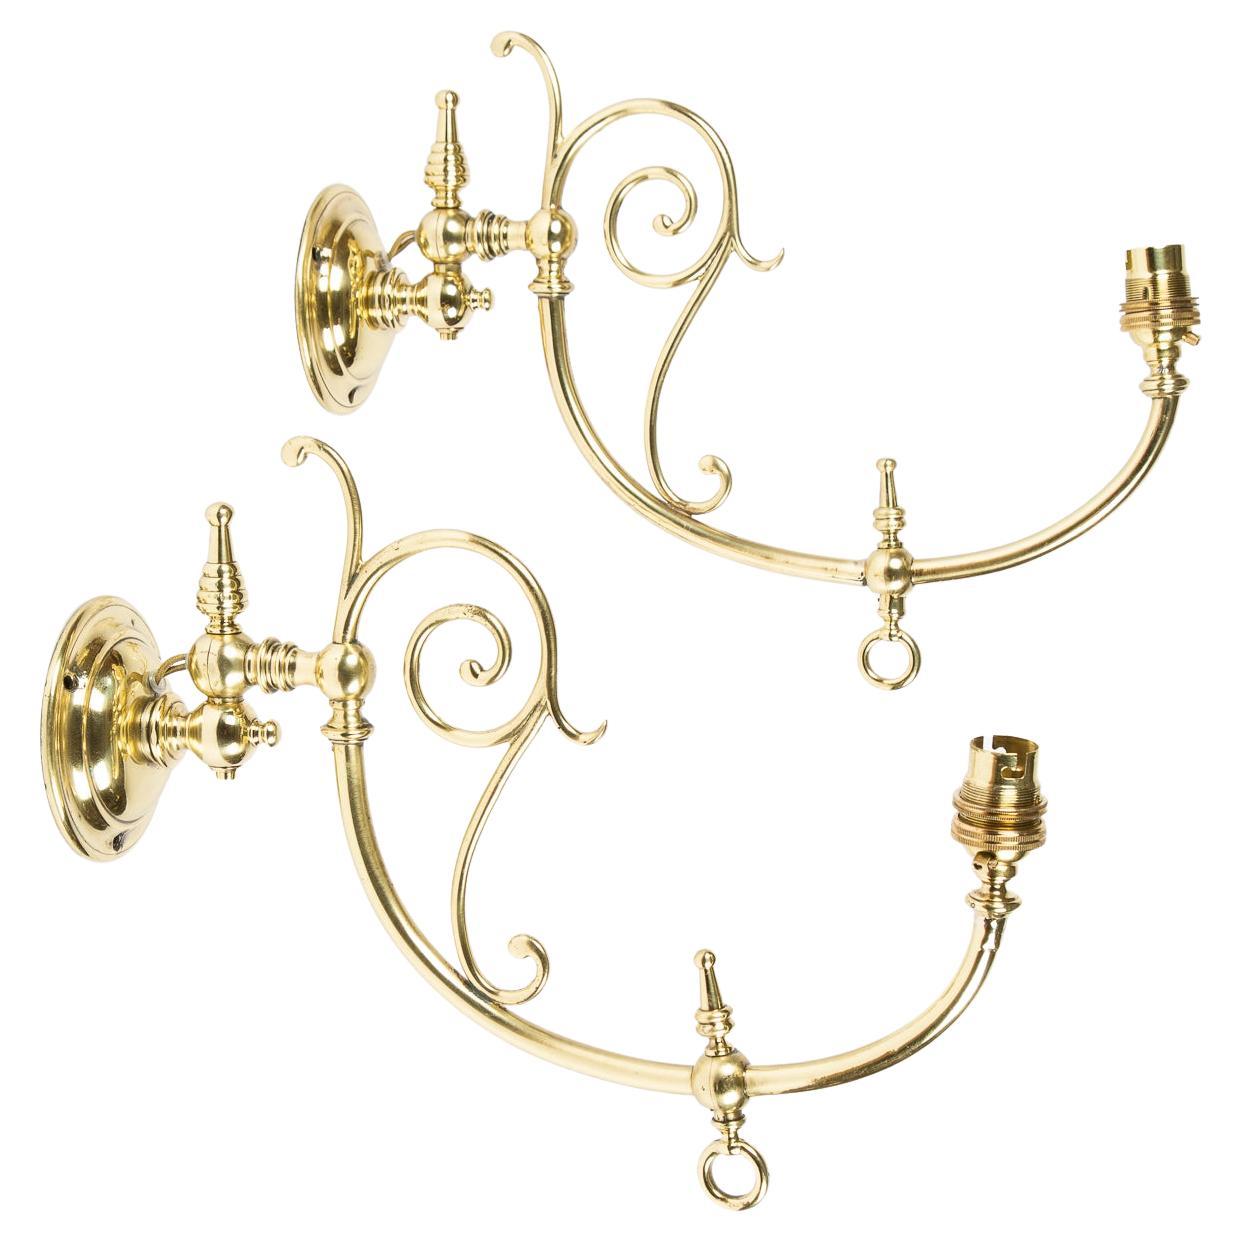 Pair of Late 19th Century Brass Scroll Arm Wall Lights